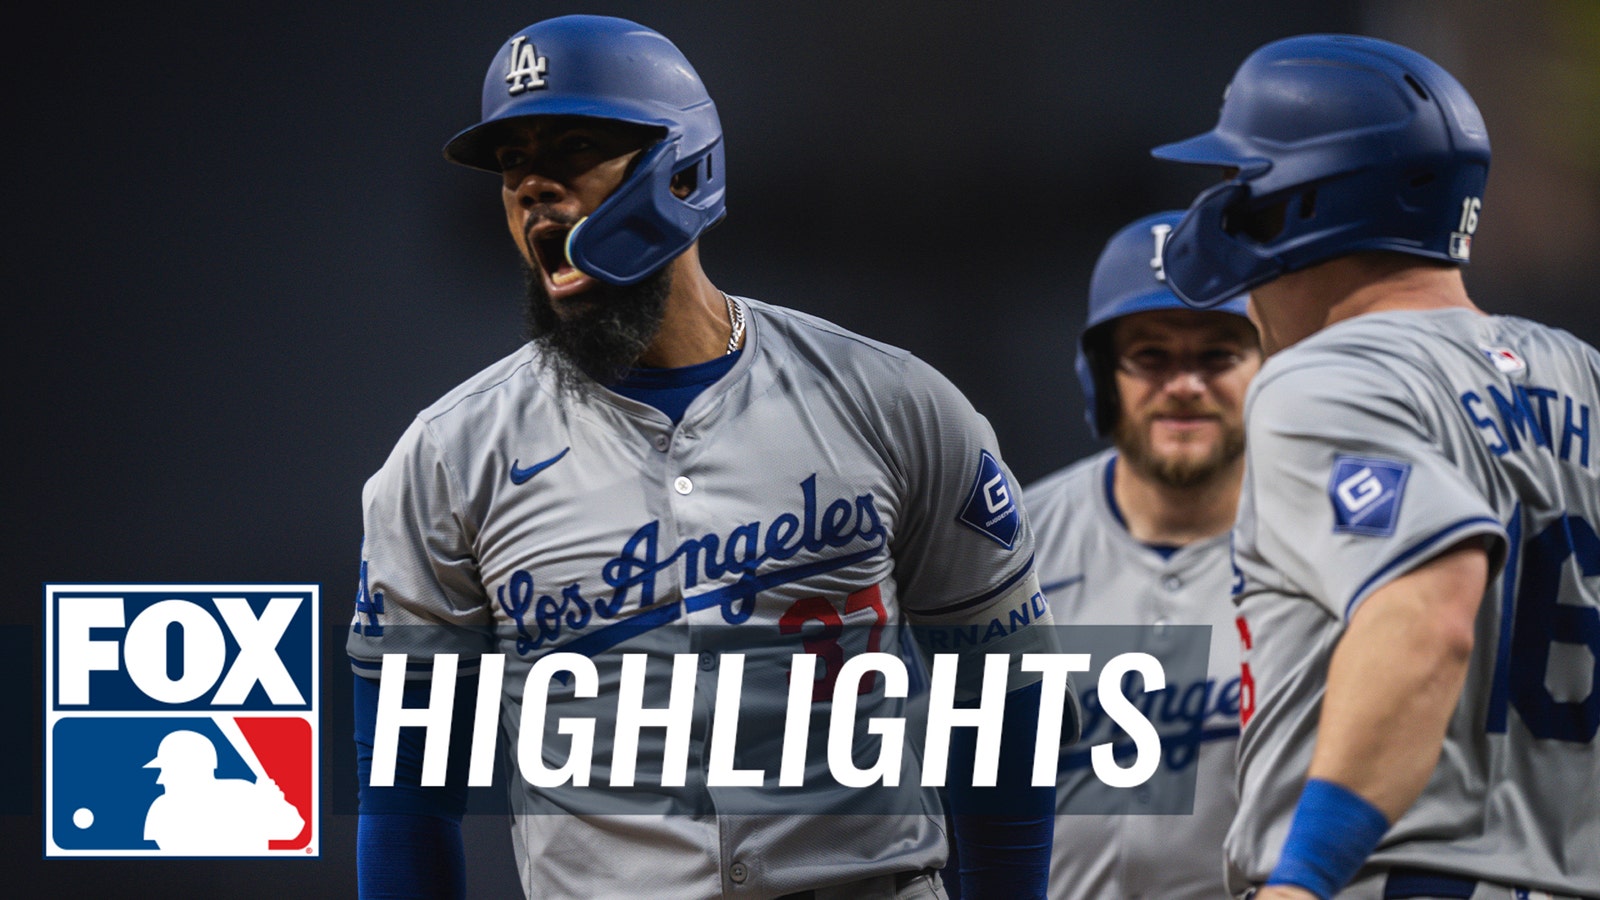 Highlights from Dodgers' 5-0 win vs. Padres